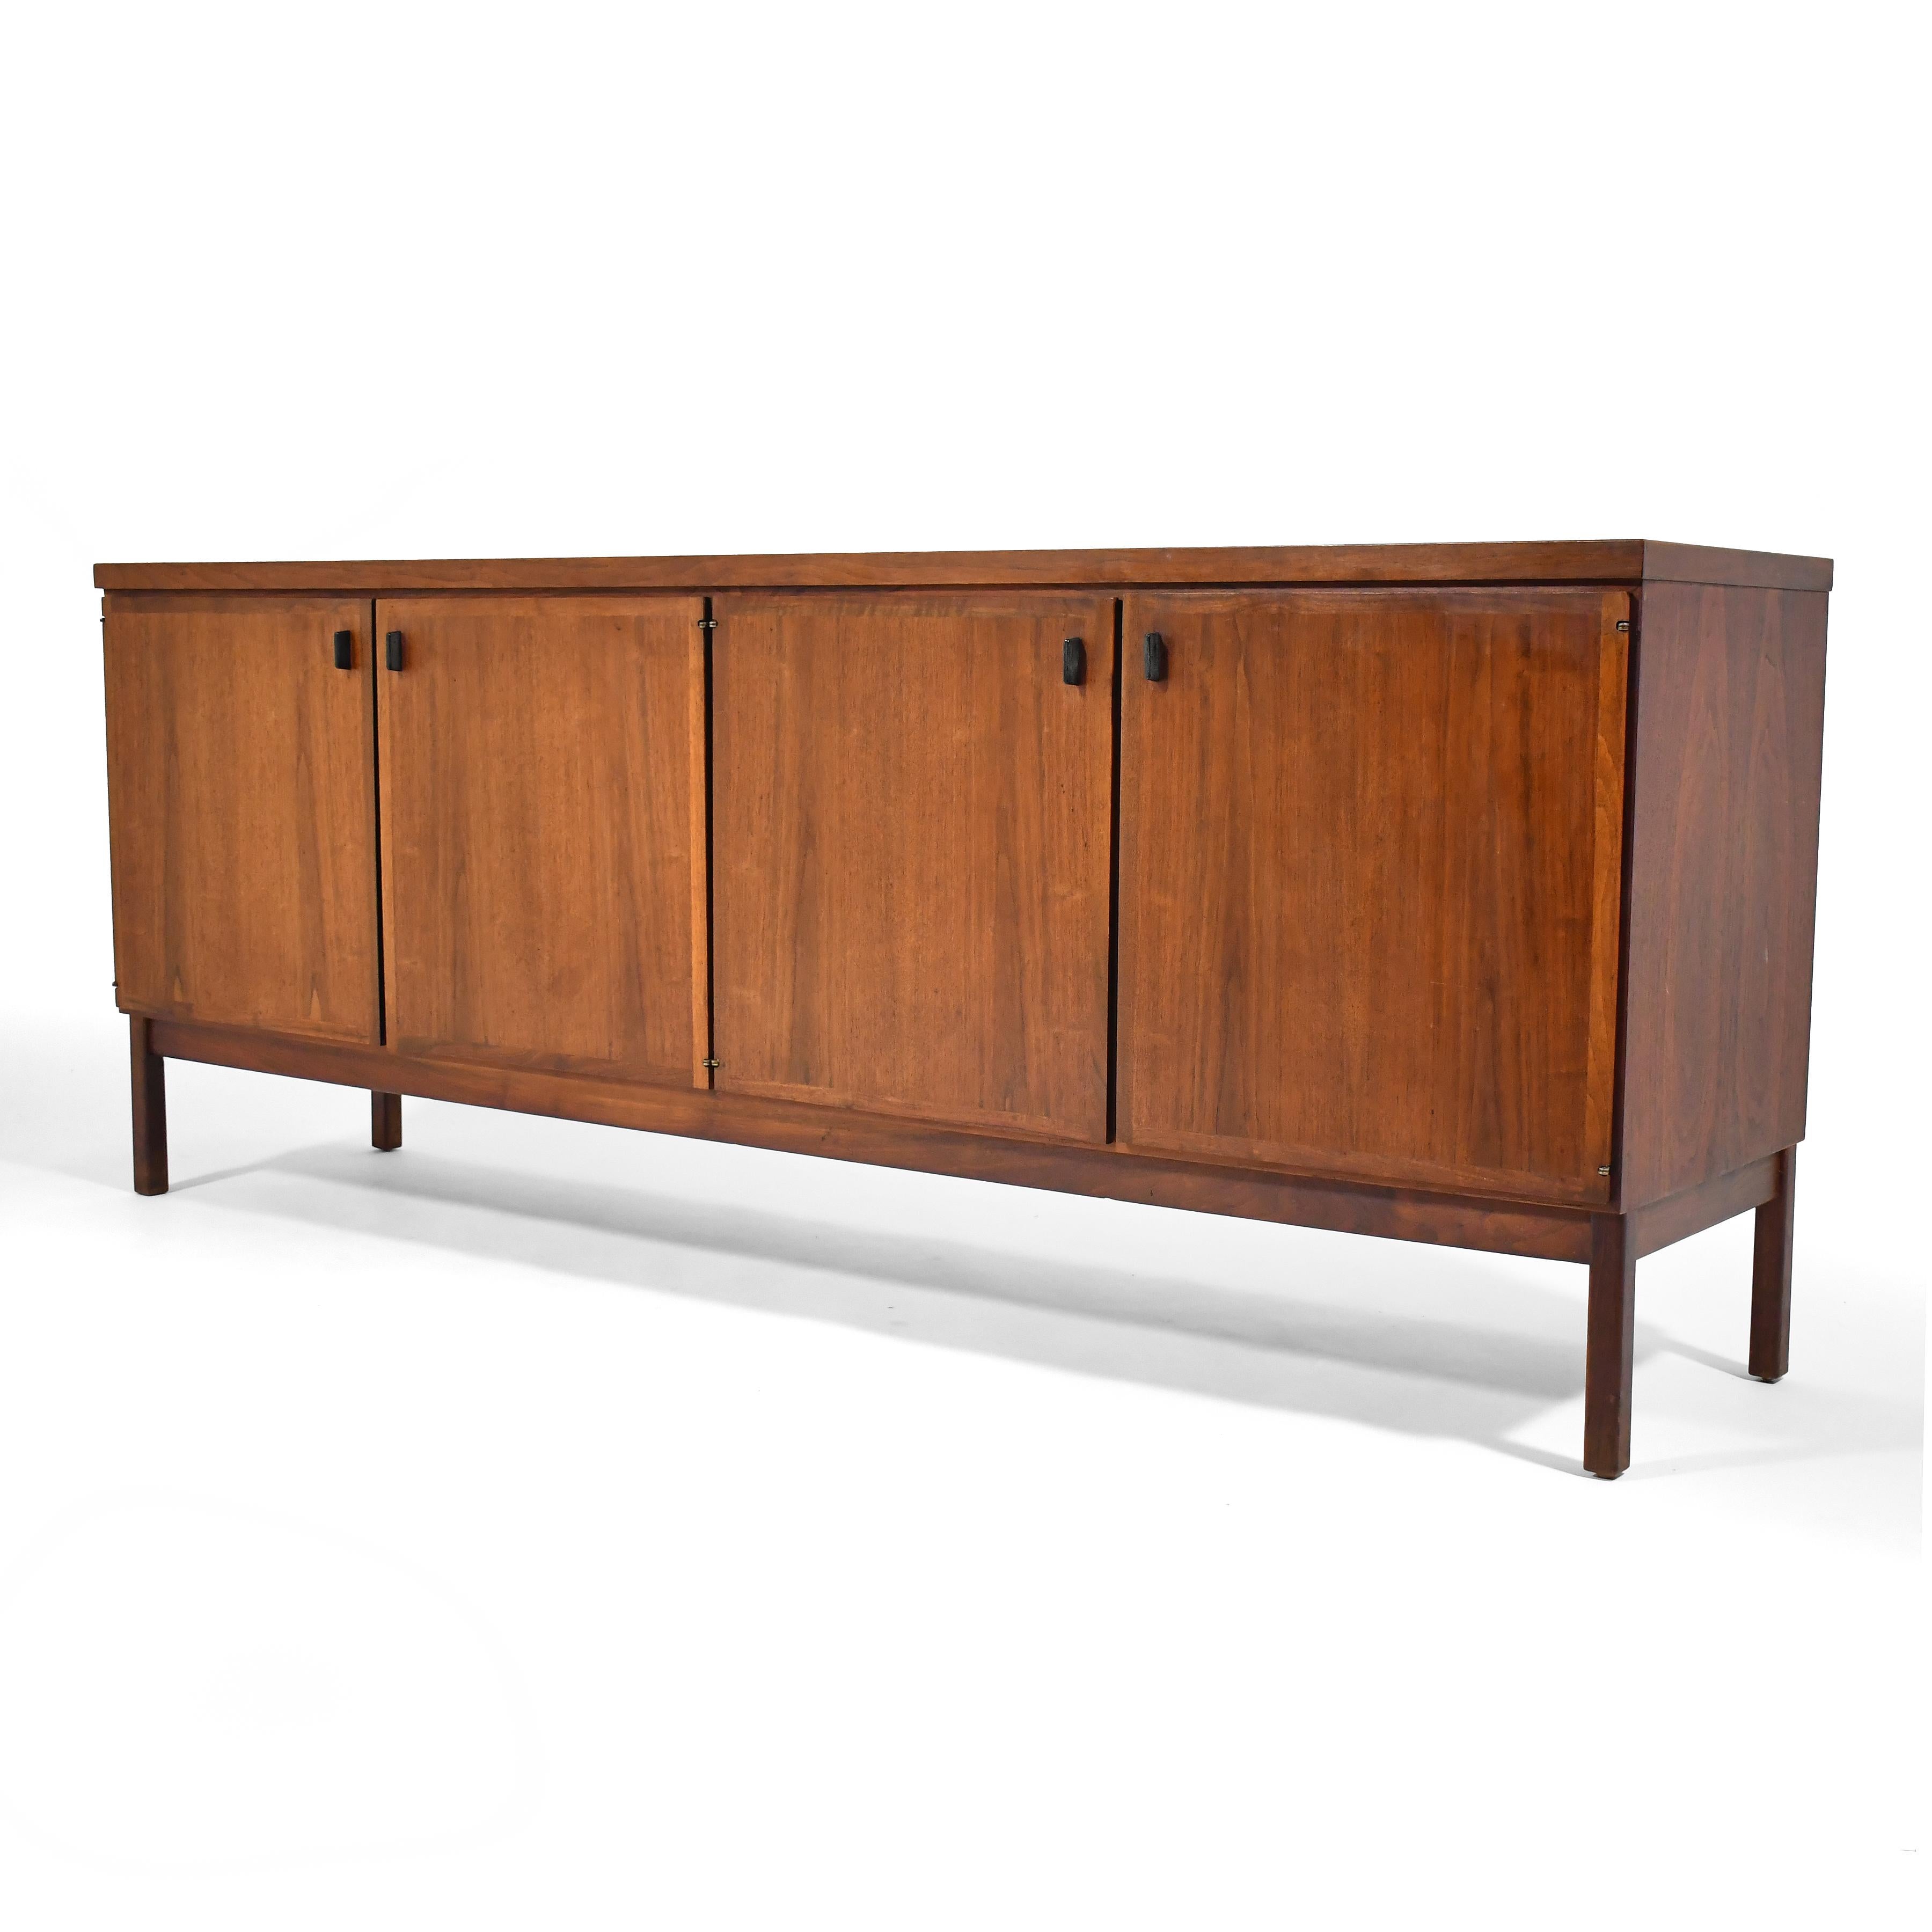 Mid-20th Century Jack Cartwright Walnut Credenza by Founders For Sale